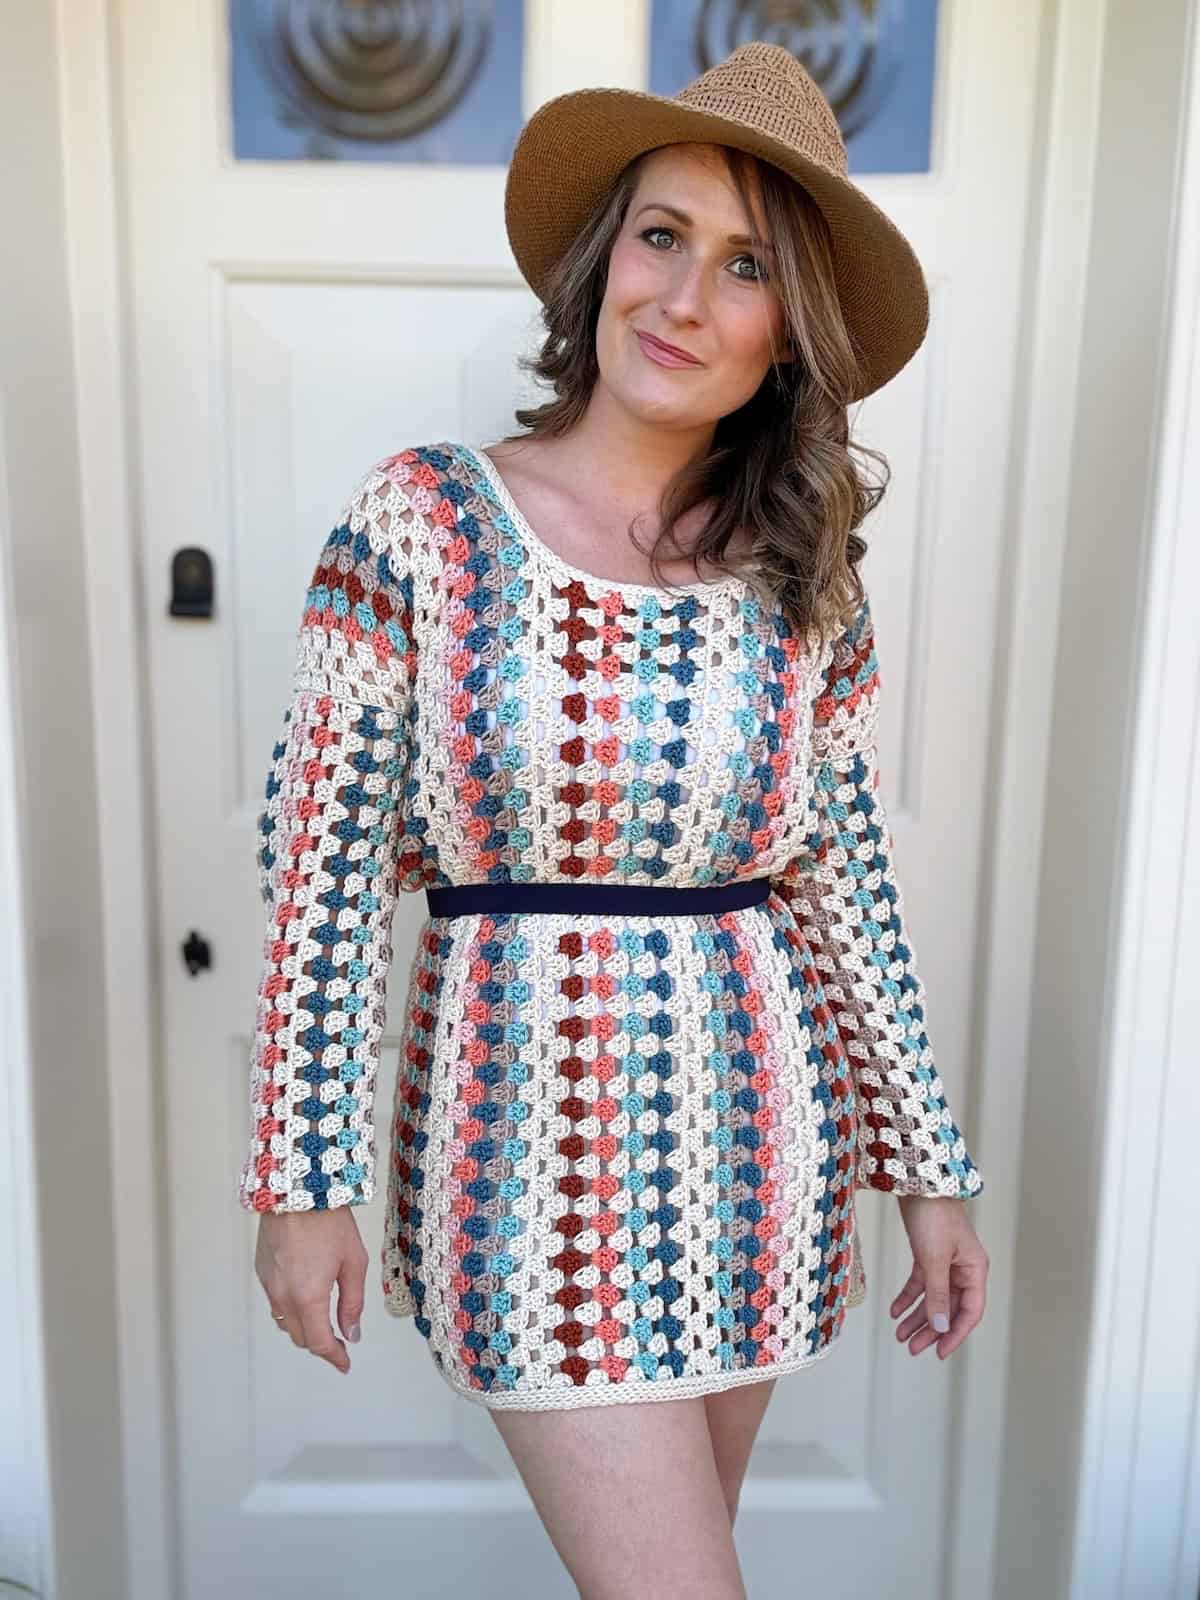 A person stands in front of a door, wearing a woven, multicolored crochet granny dress and a brown hat.